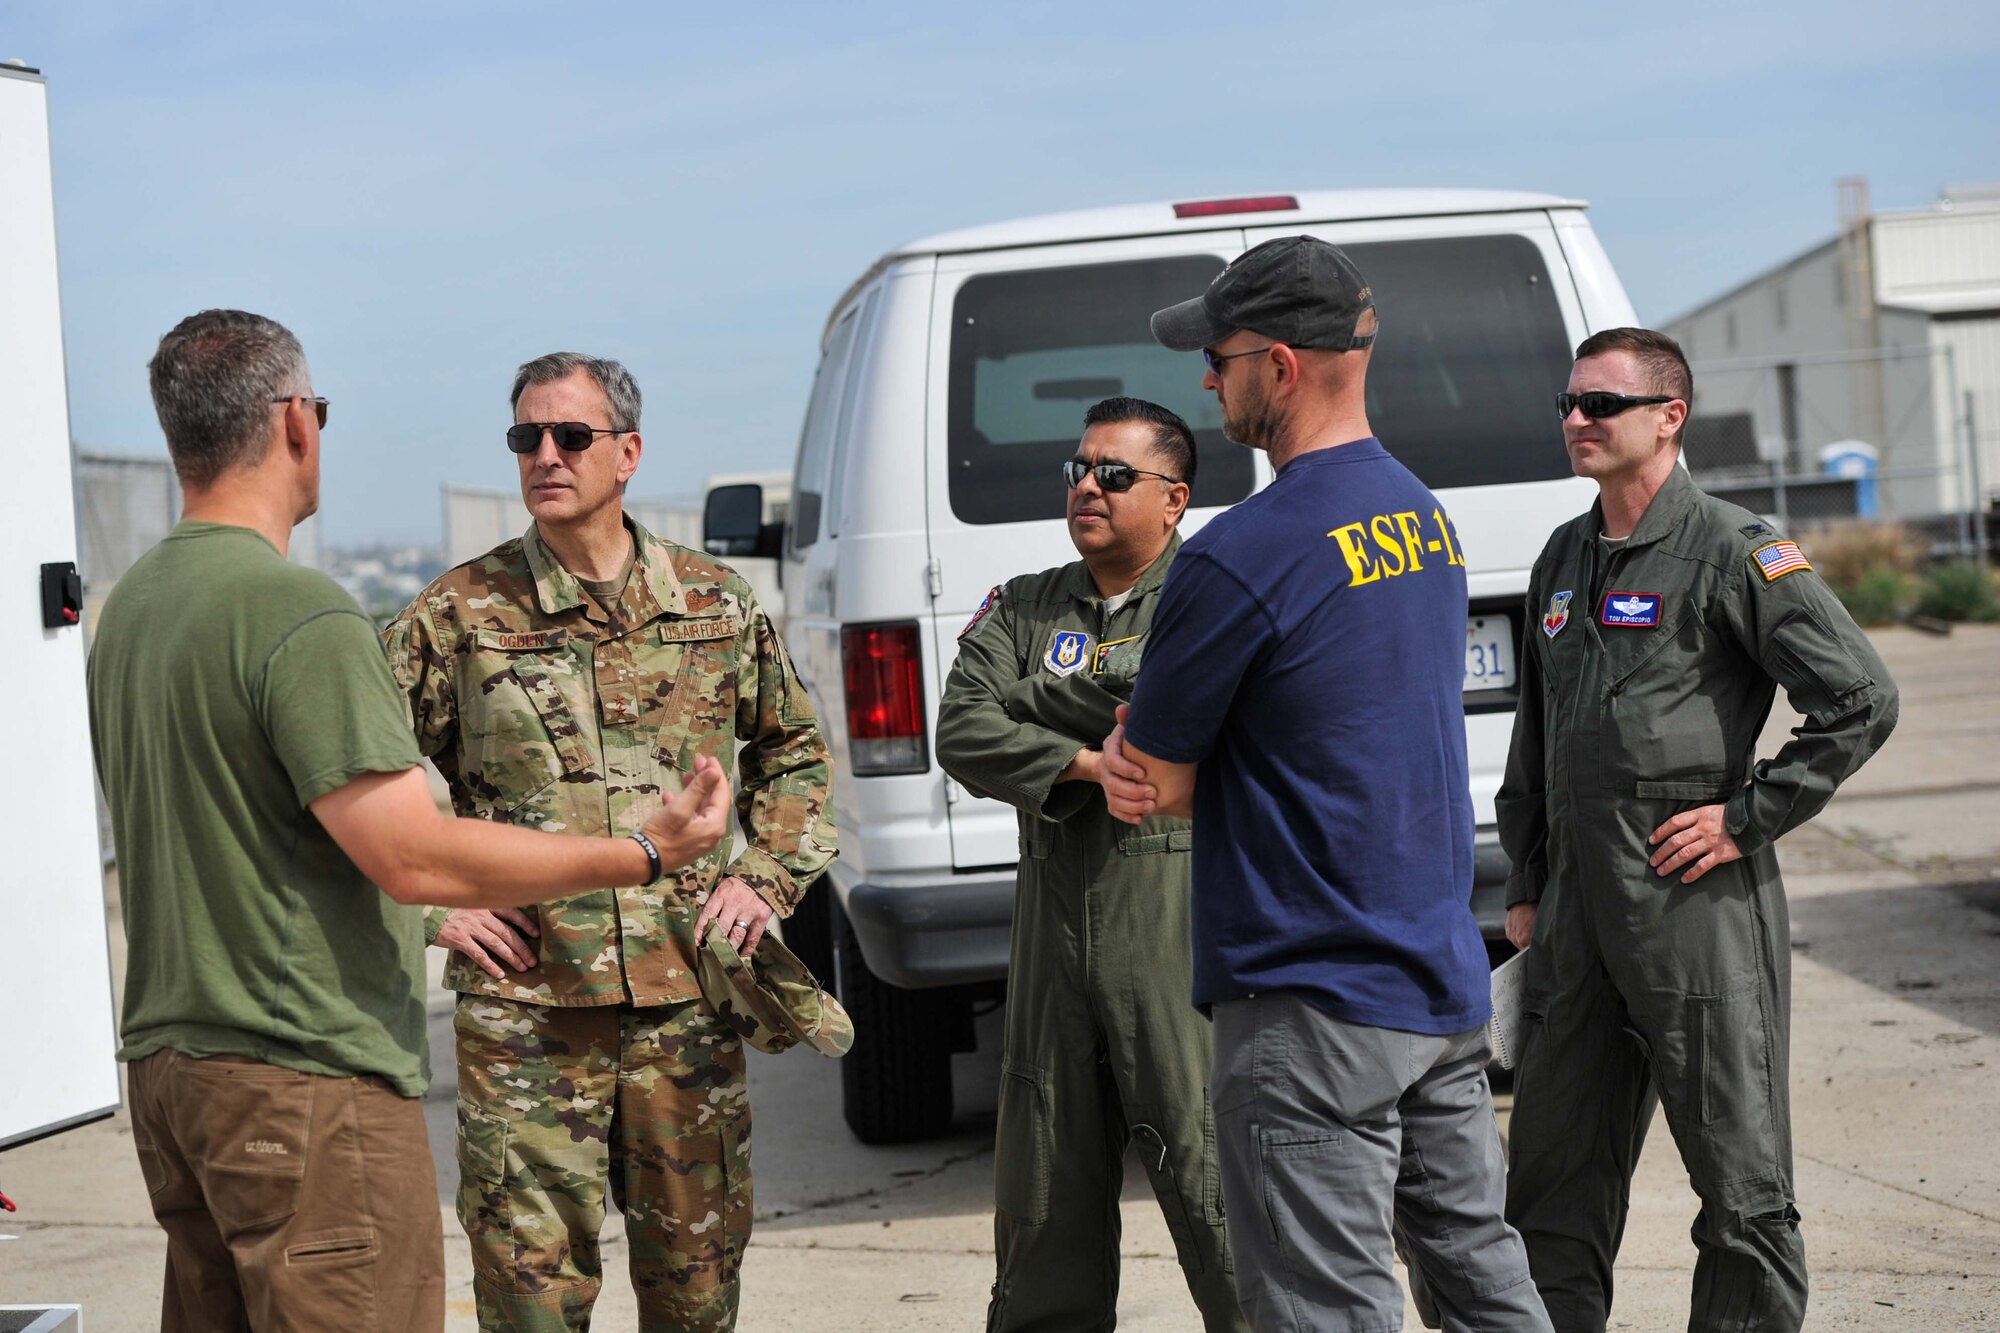 U.S. Air Force Maj. Gen. Randall W. Ogden, commander, Headquarters Fourth Air Force, second from left, meets with representatives from the FBI Rapid Deployment Team, Los Angeles, and the Federal Emergency Management Agency Emergency Support Function 13, California, during exercise Patriot Hook, April 14, 2019, at Naval Air Station North Island, California. Patriot Hook is an annual exercise simulating a joint military and civilian force response to a natural disaster in a forward deployed location. (U.S. Air Force photo by Tech. Sgt. Heather Cozad Staley)